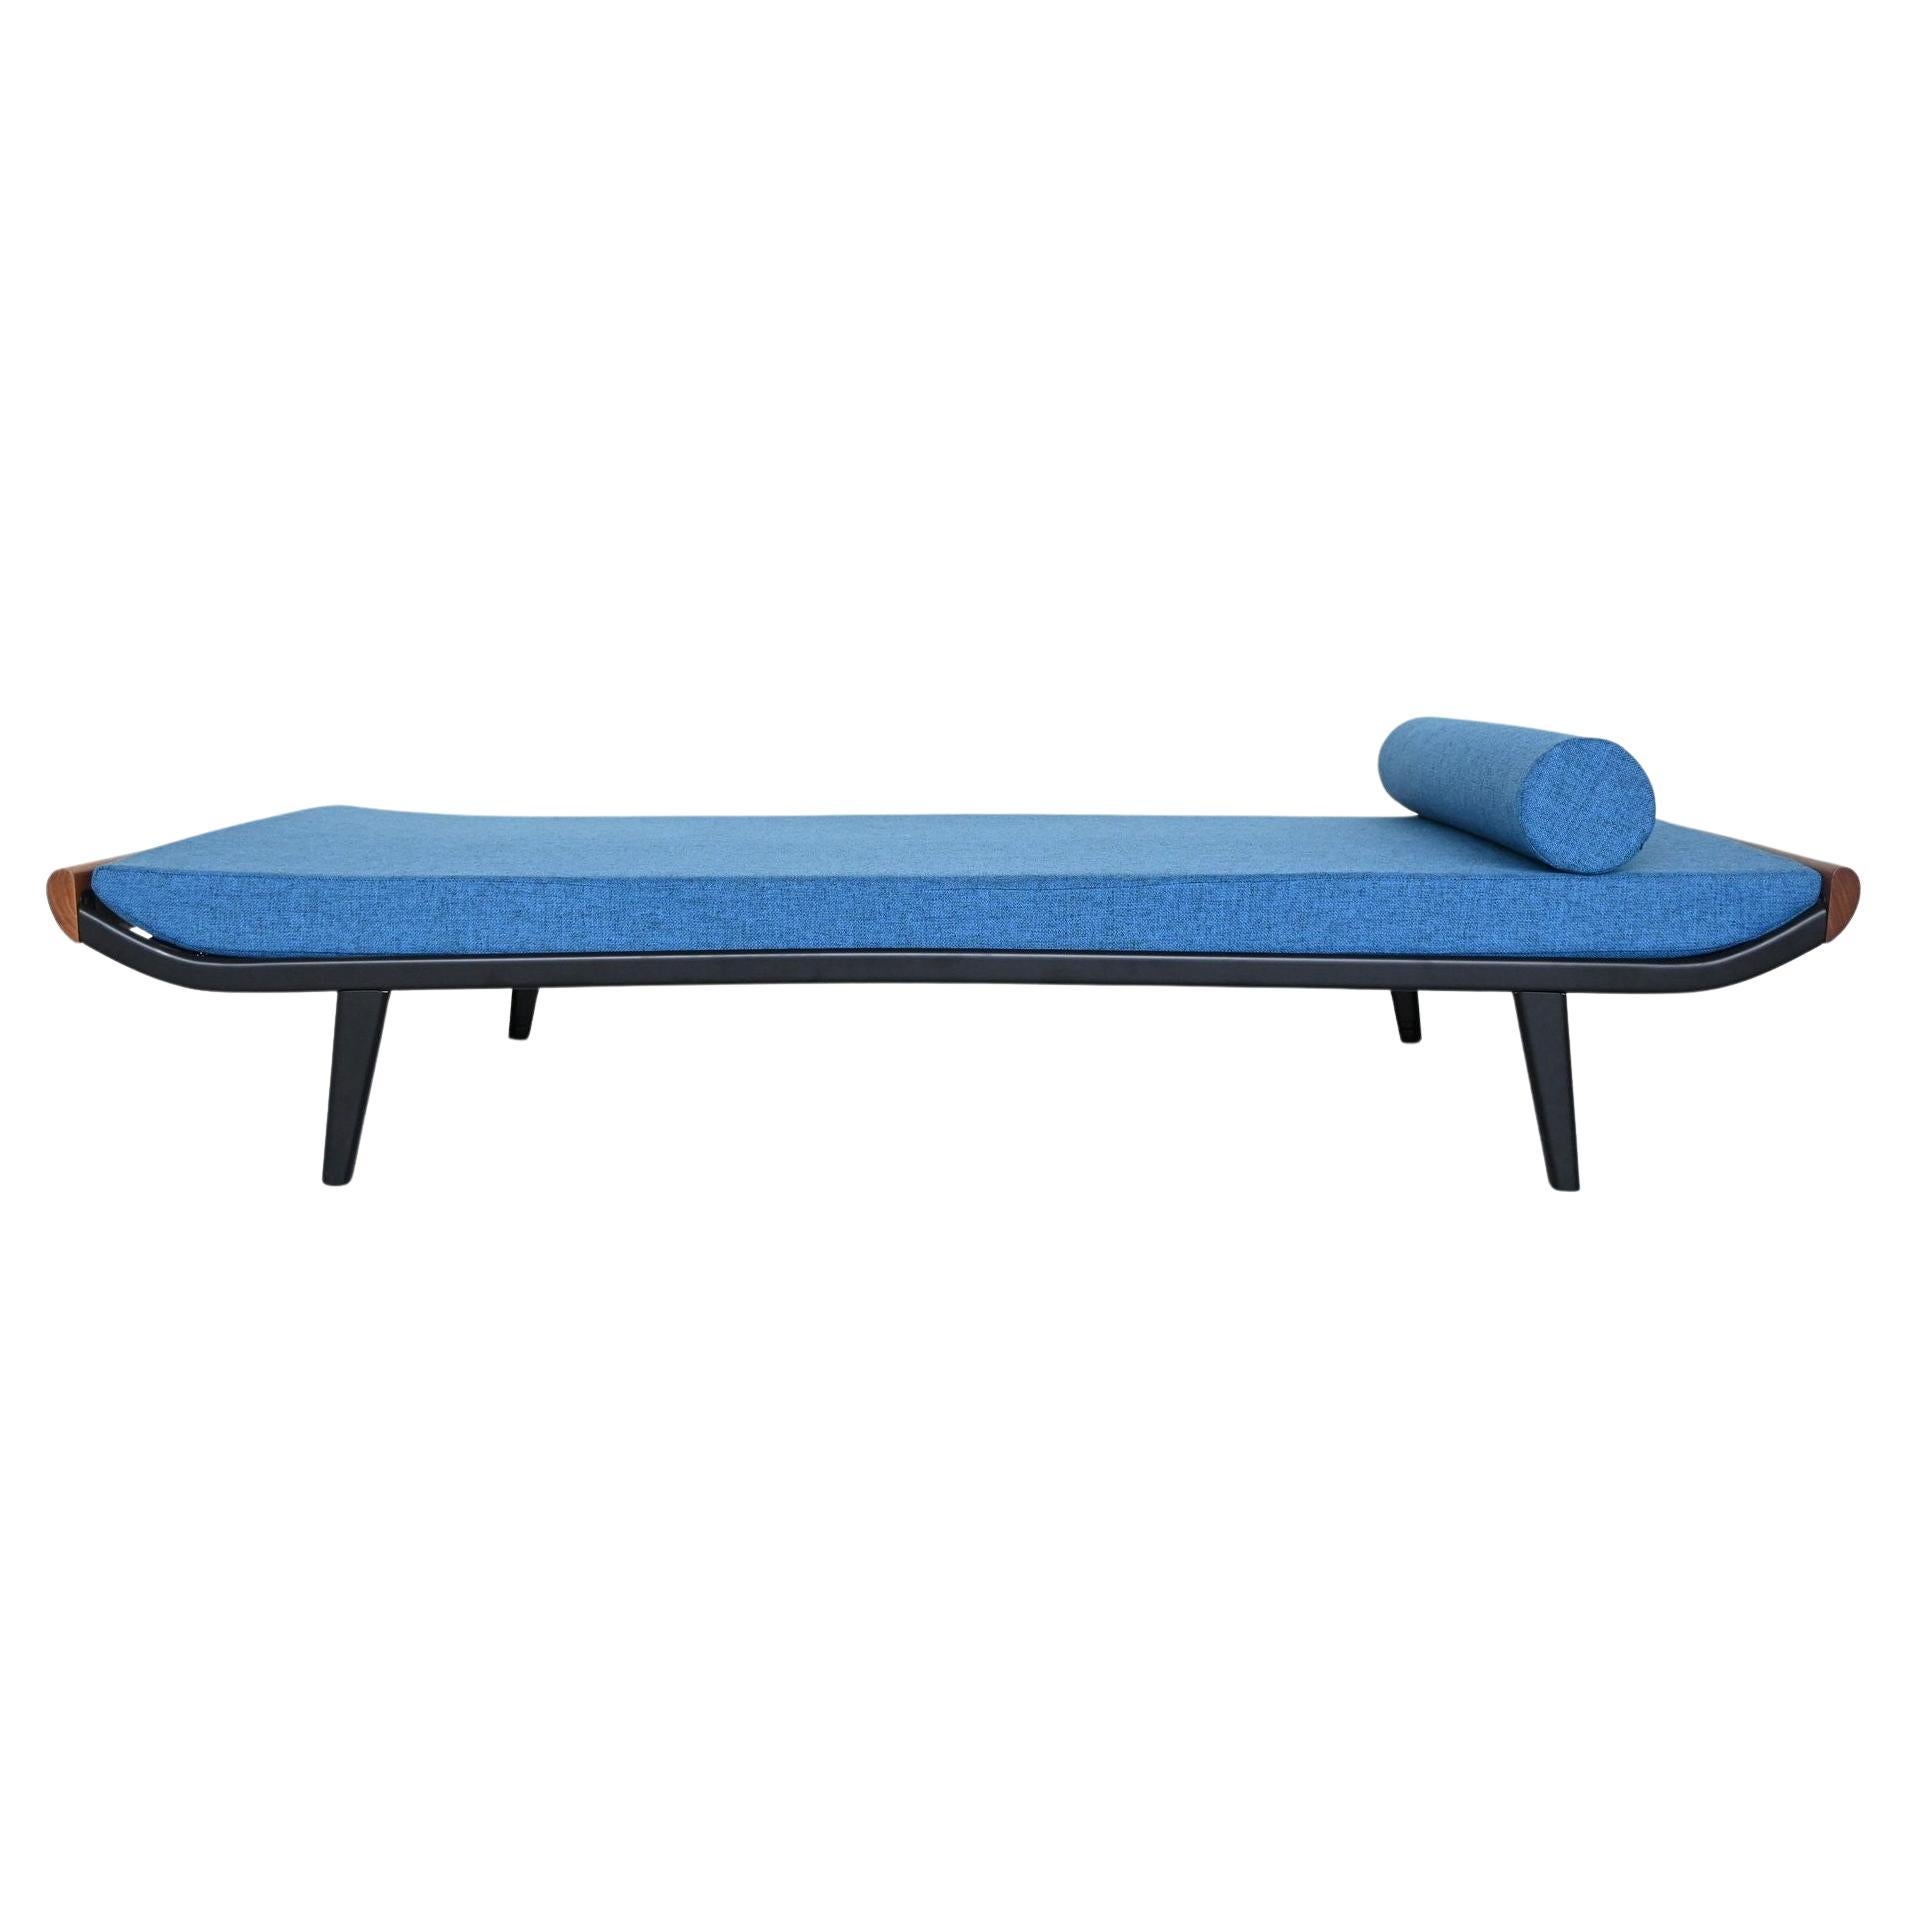 Dick Cordemeijer Cleopatra daybed in blue Auping The Netherlands 1954 For Sale